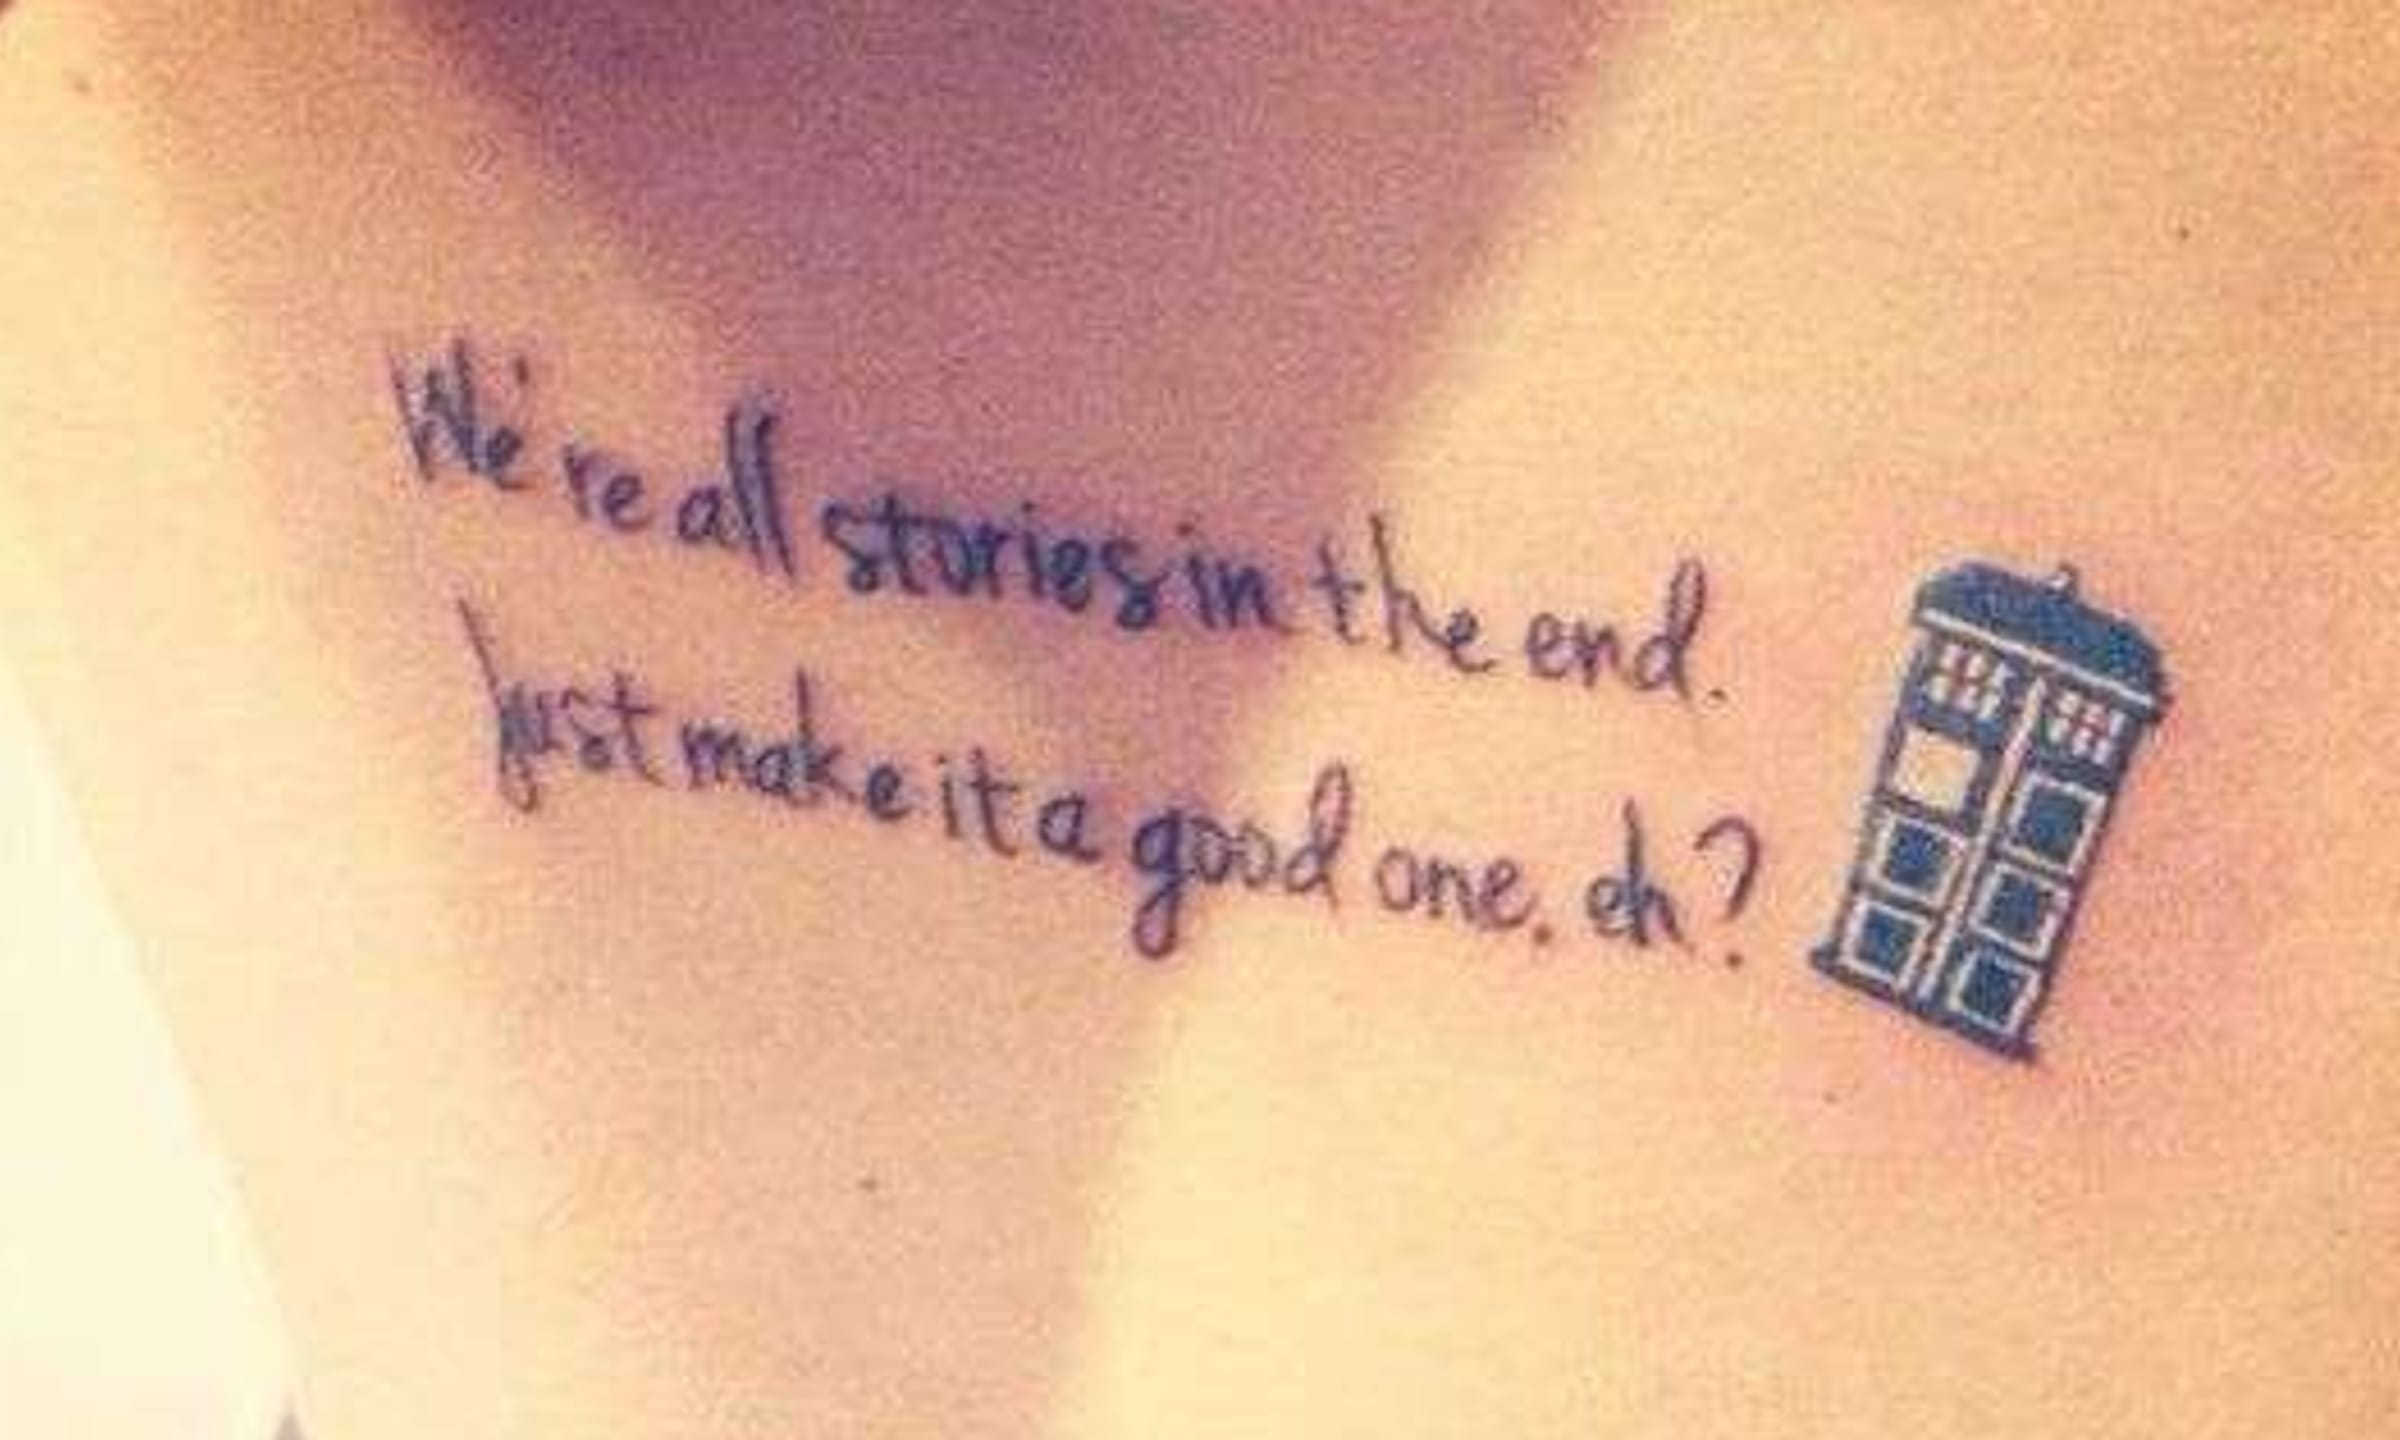 Doctor who quote tattoo